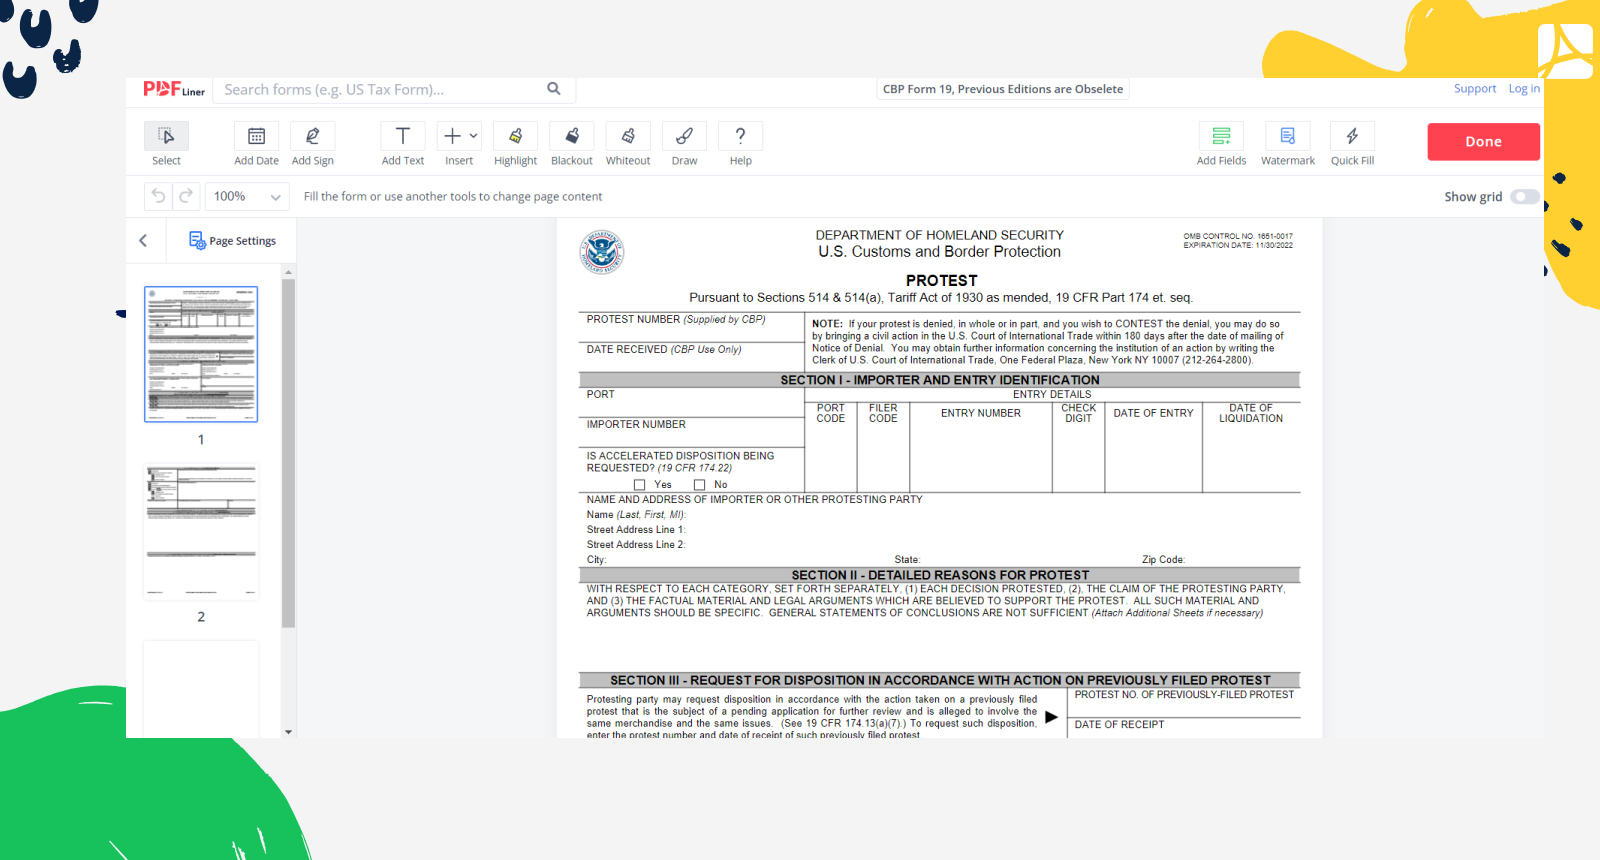 Fillable CBP Form 19, Previous Editions are Obselete Screenshot